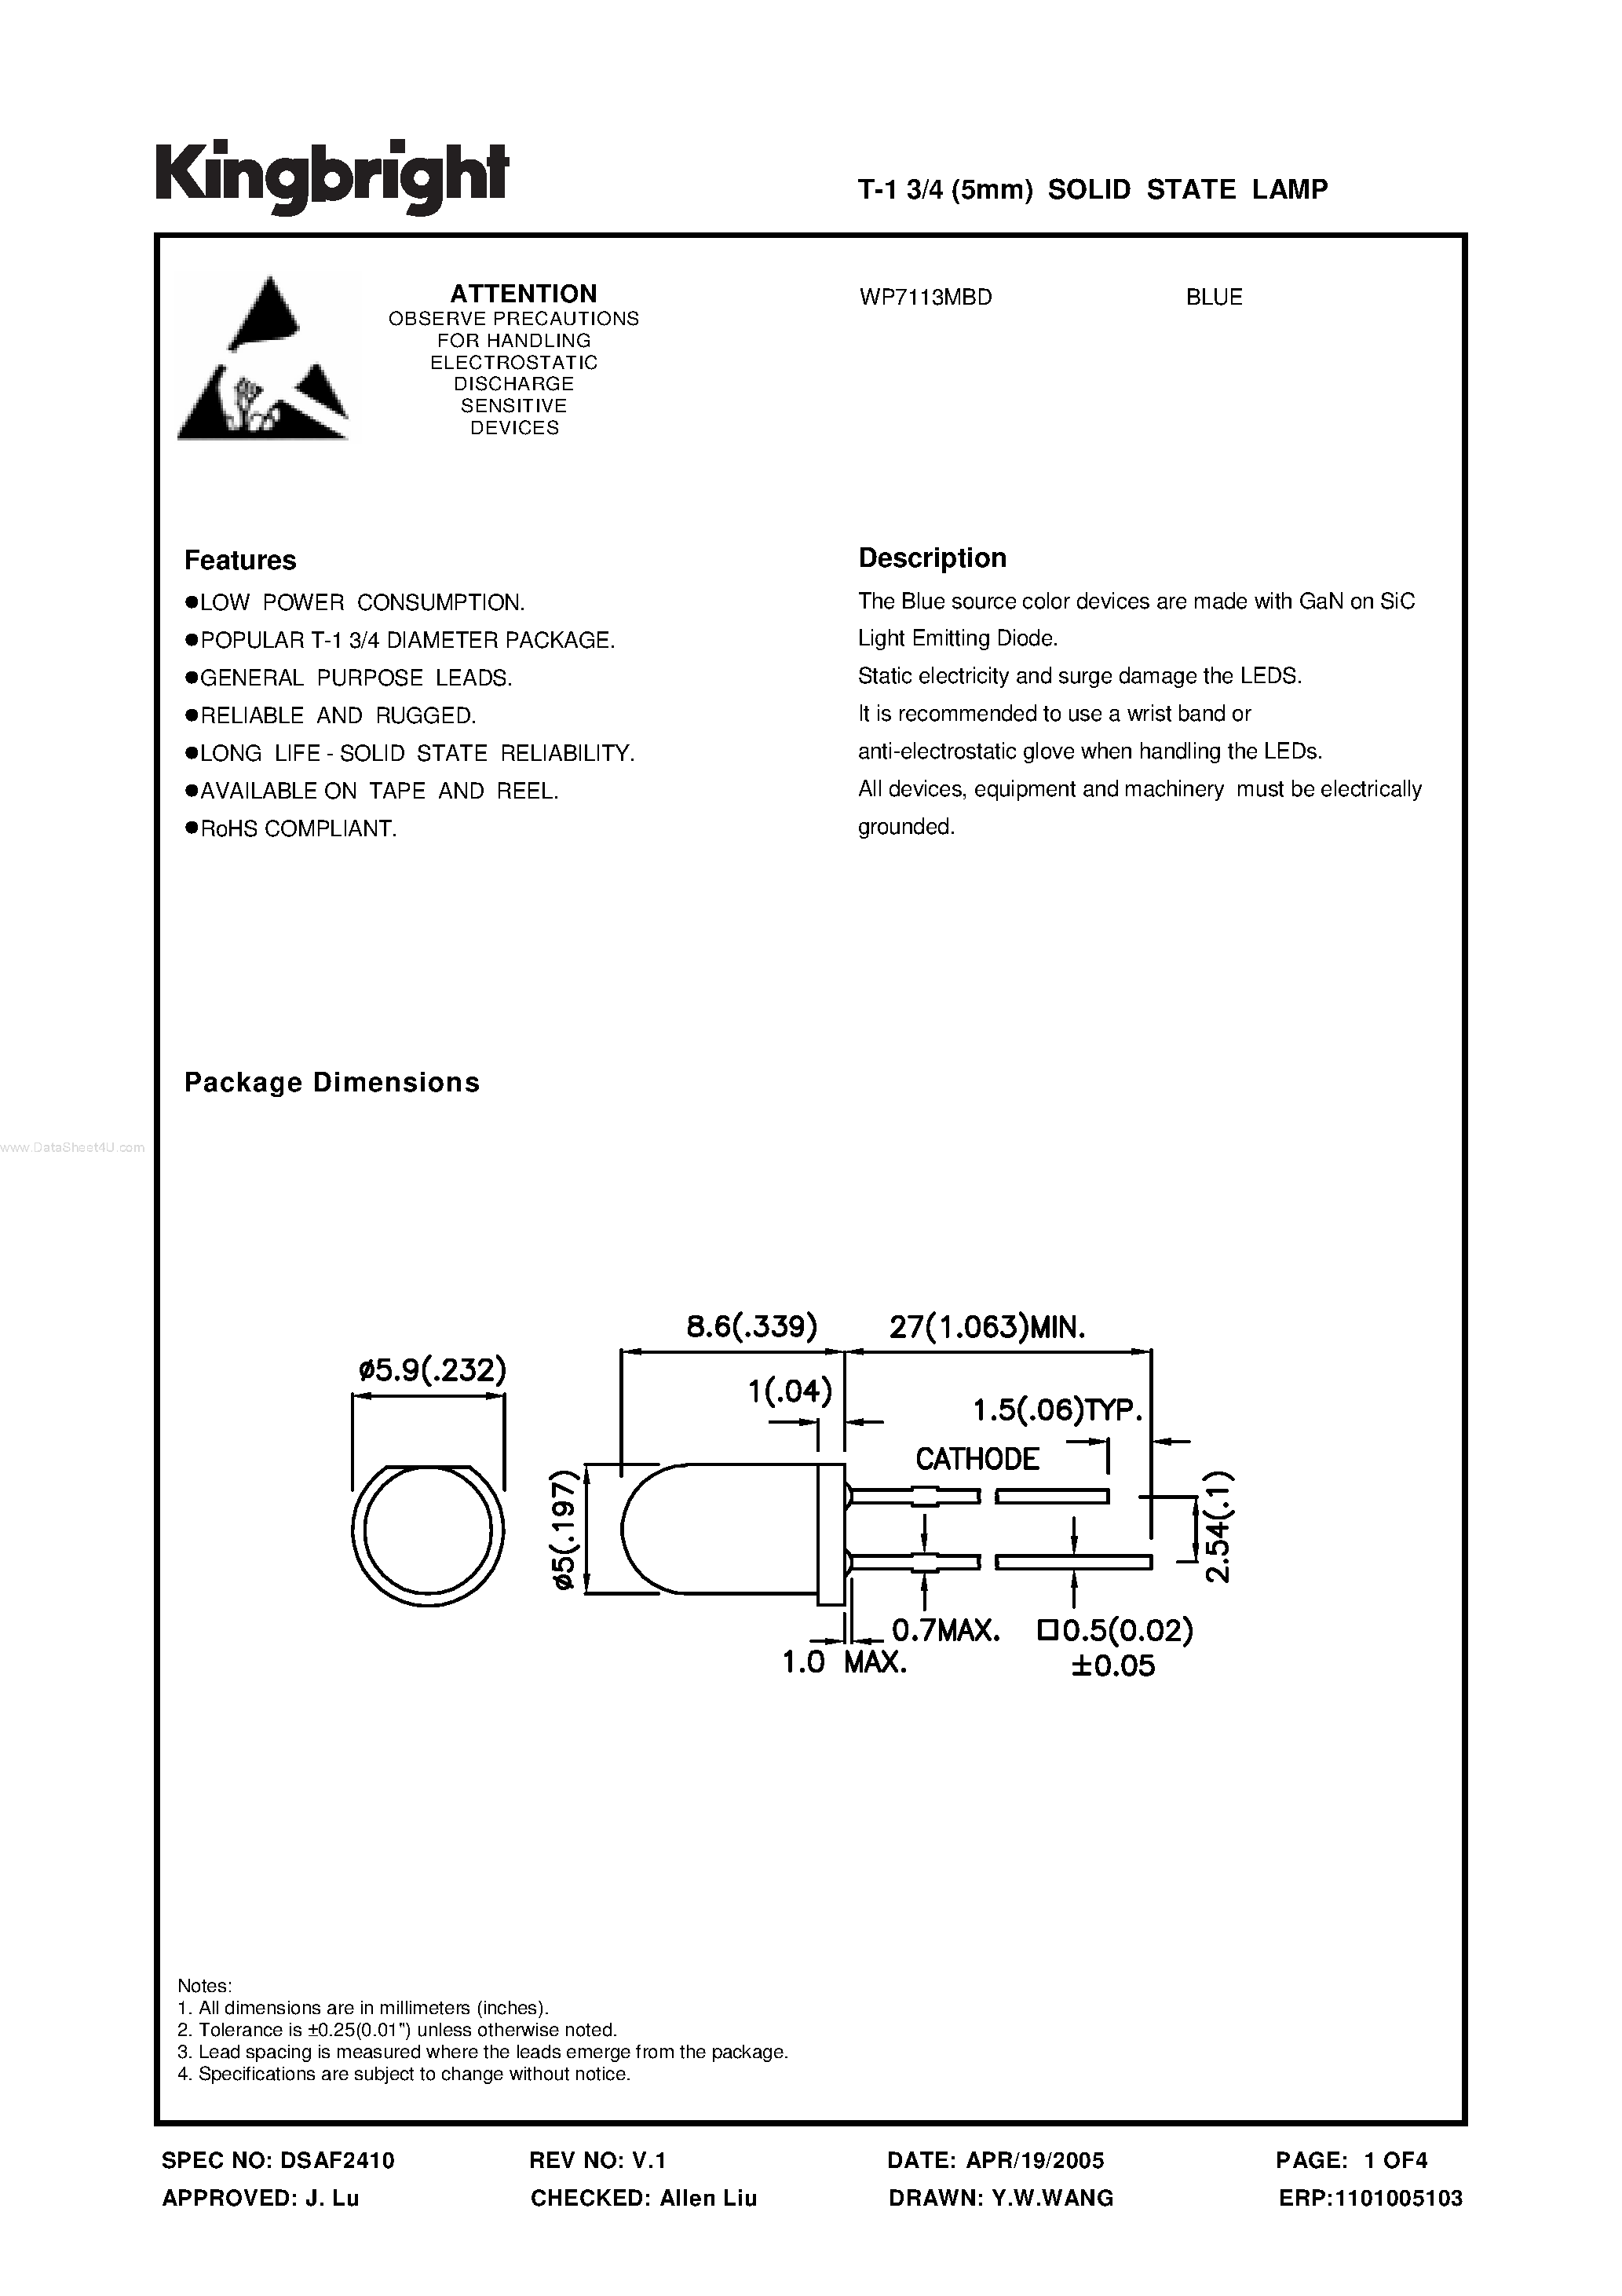 Datasheet WP7113MBD - SOLID STATE LAMP page 1